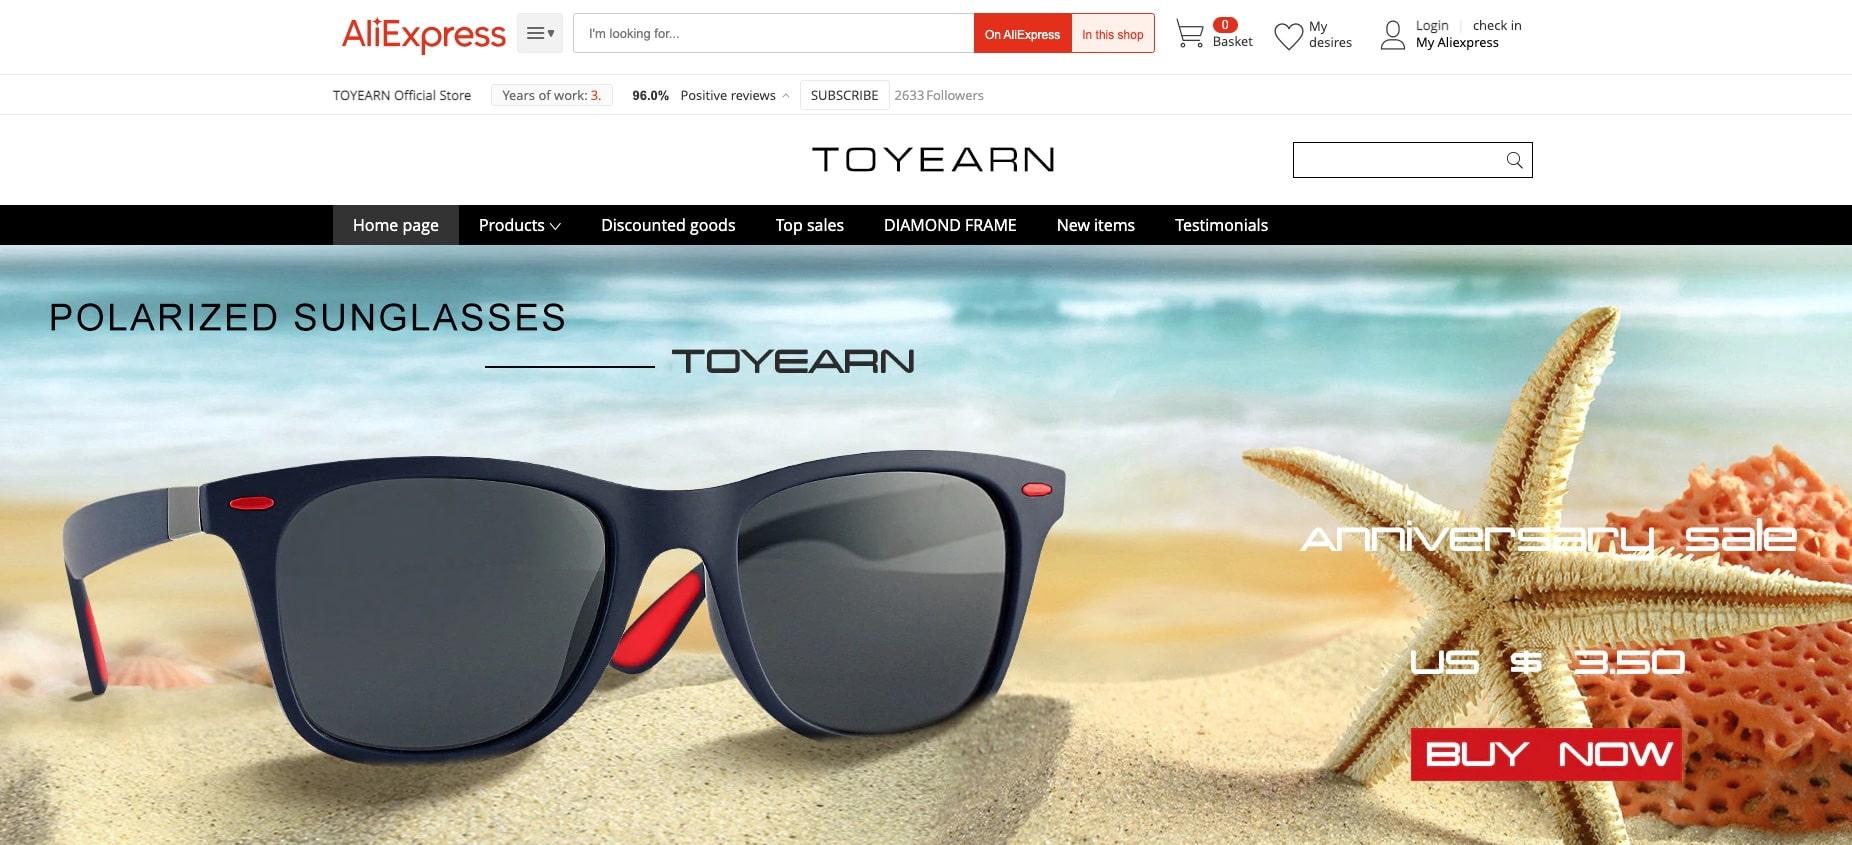 a picture showing one of the best sunglasses suppliers on AliExpress to safely deal with